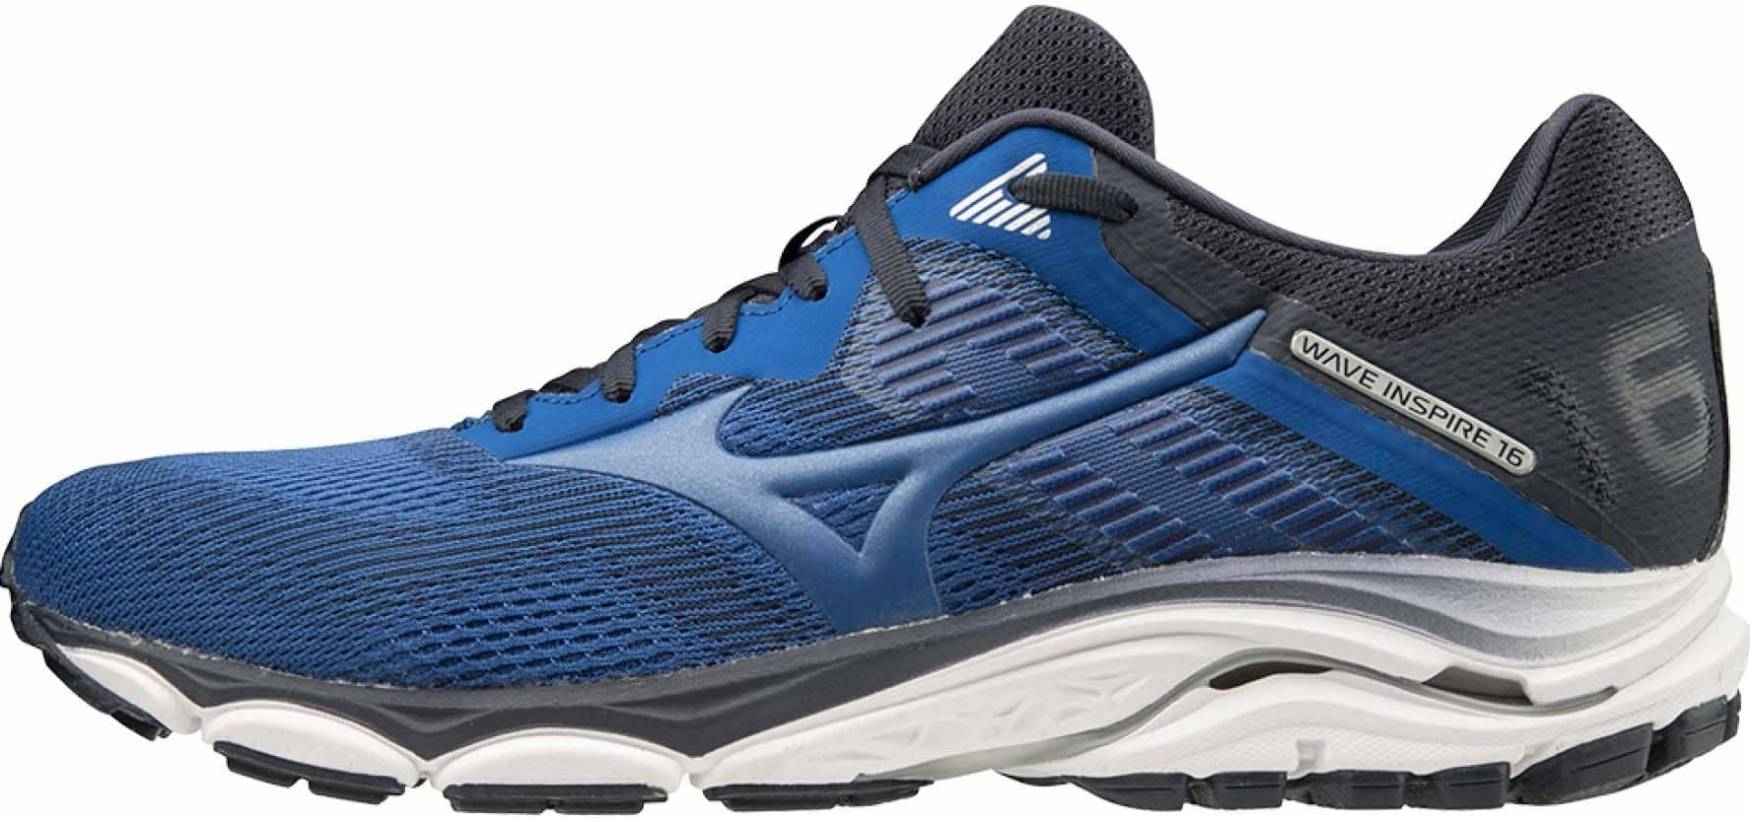 Save 44% on Wide Mizuno Running Shoes 